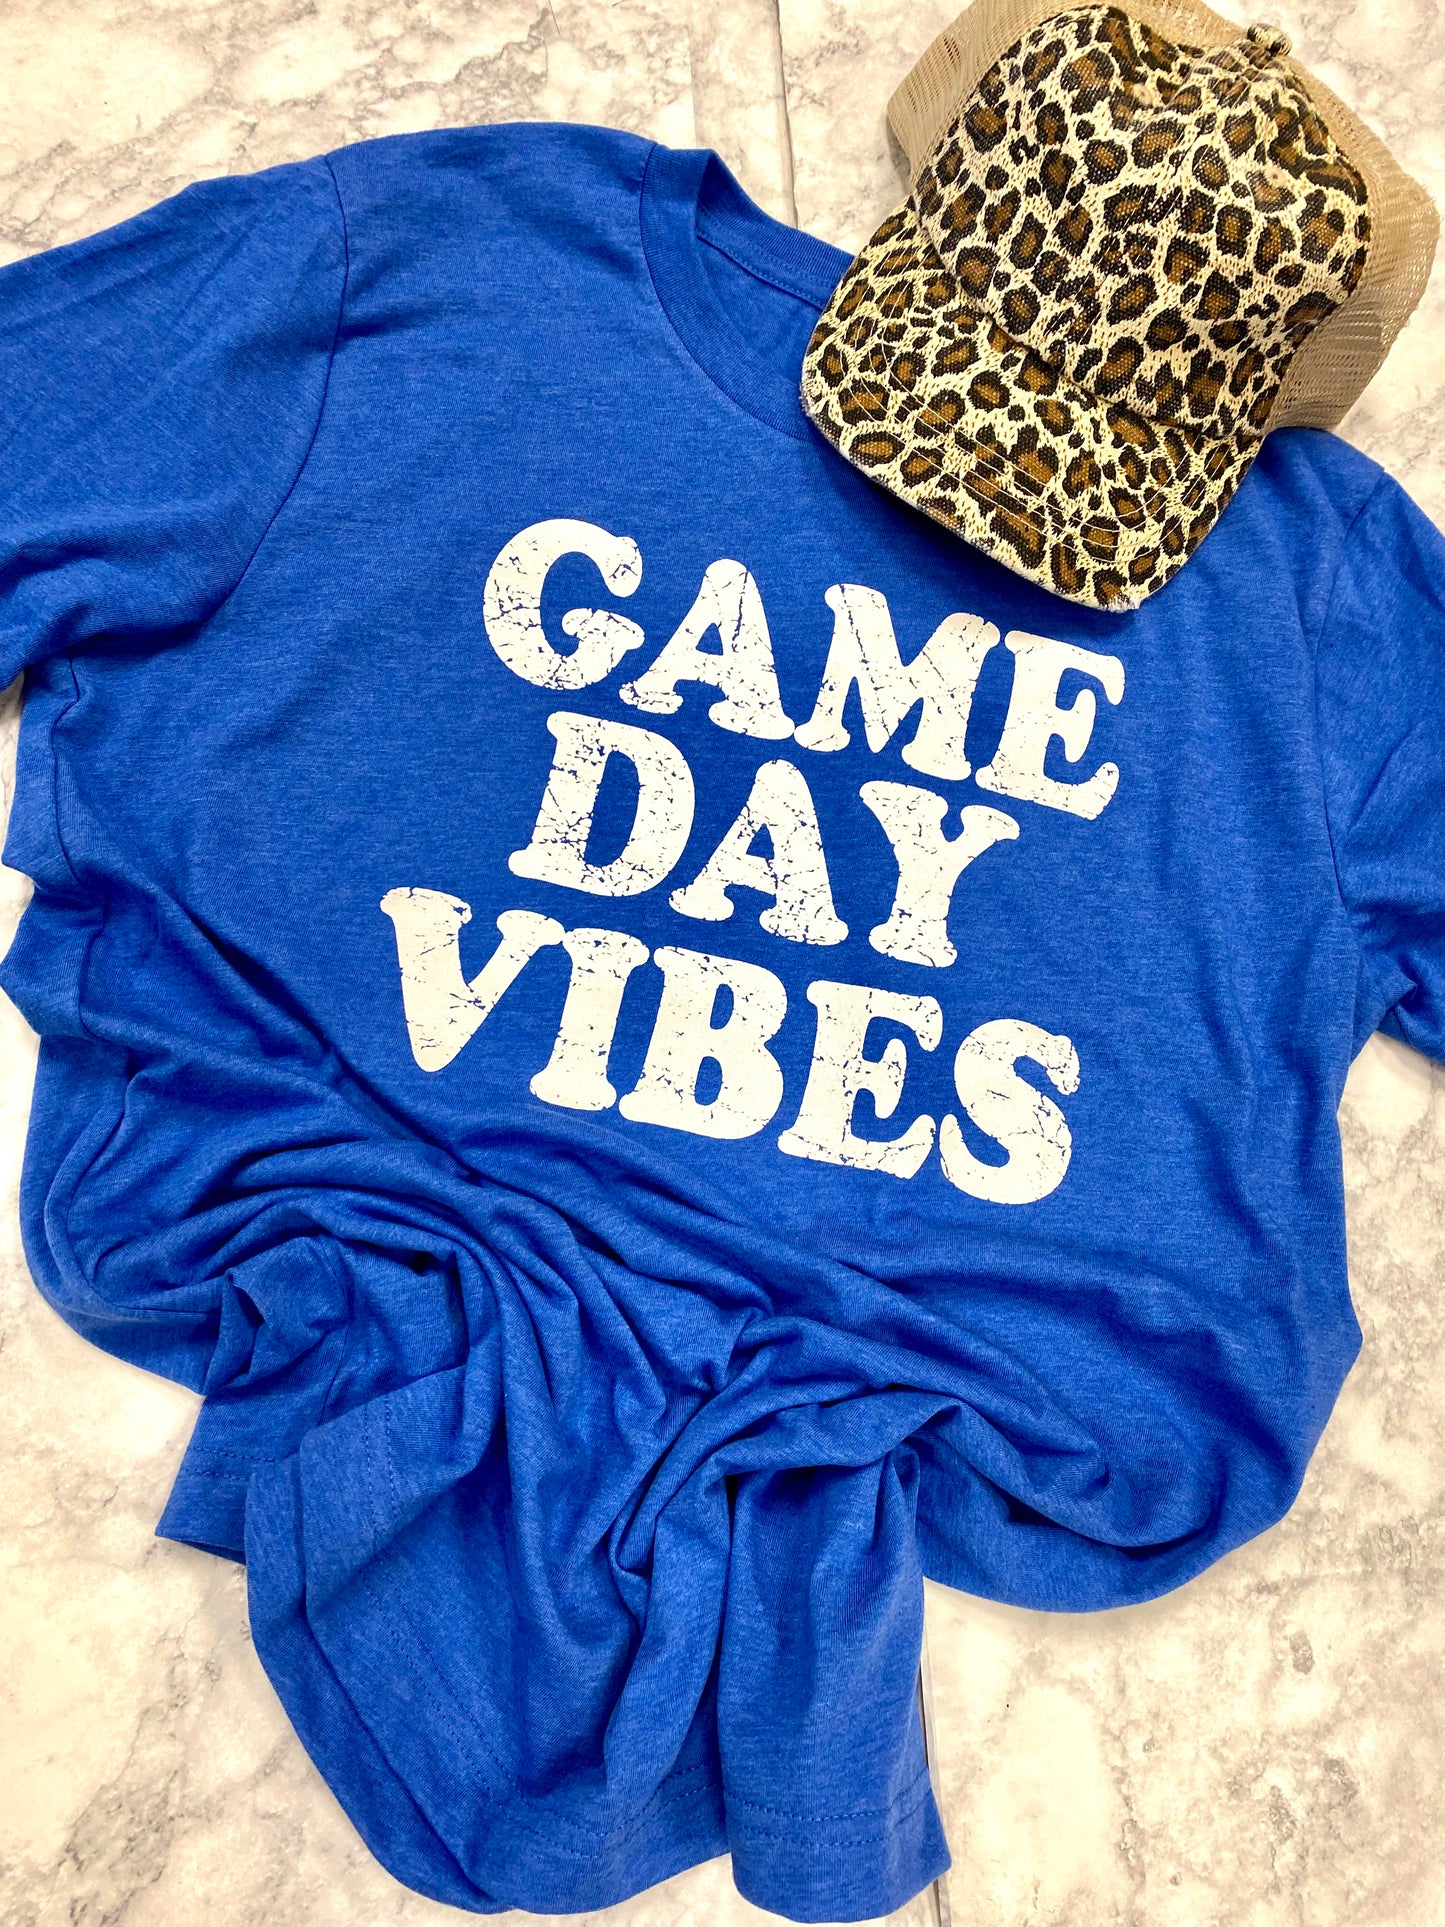 GAME DAY VIBES T-Shirt (Heather Blue)